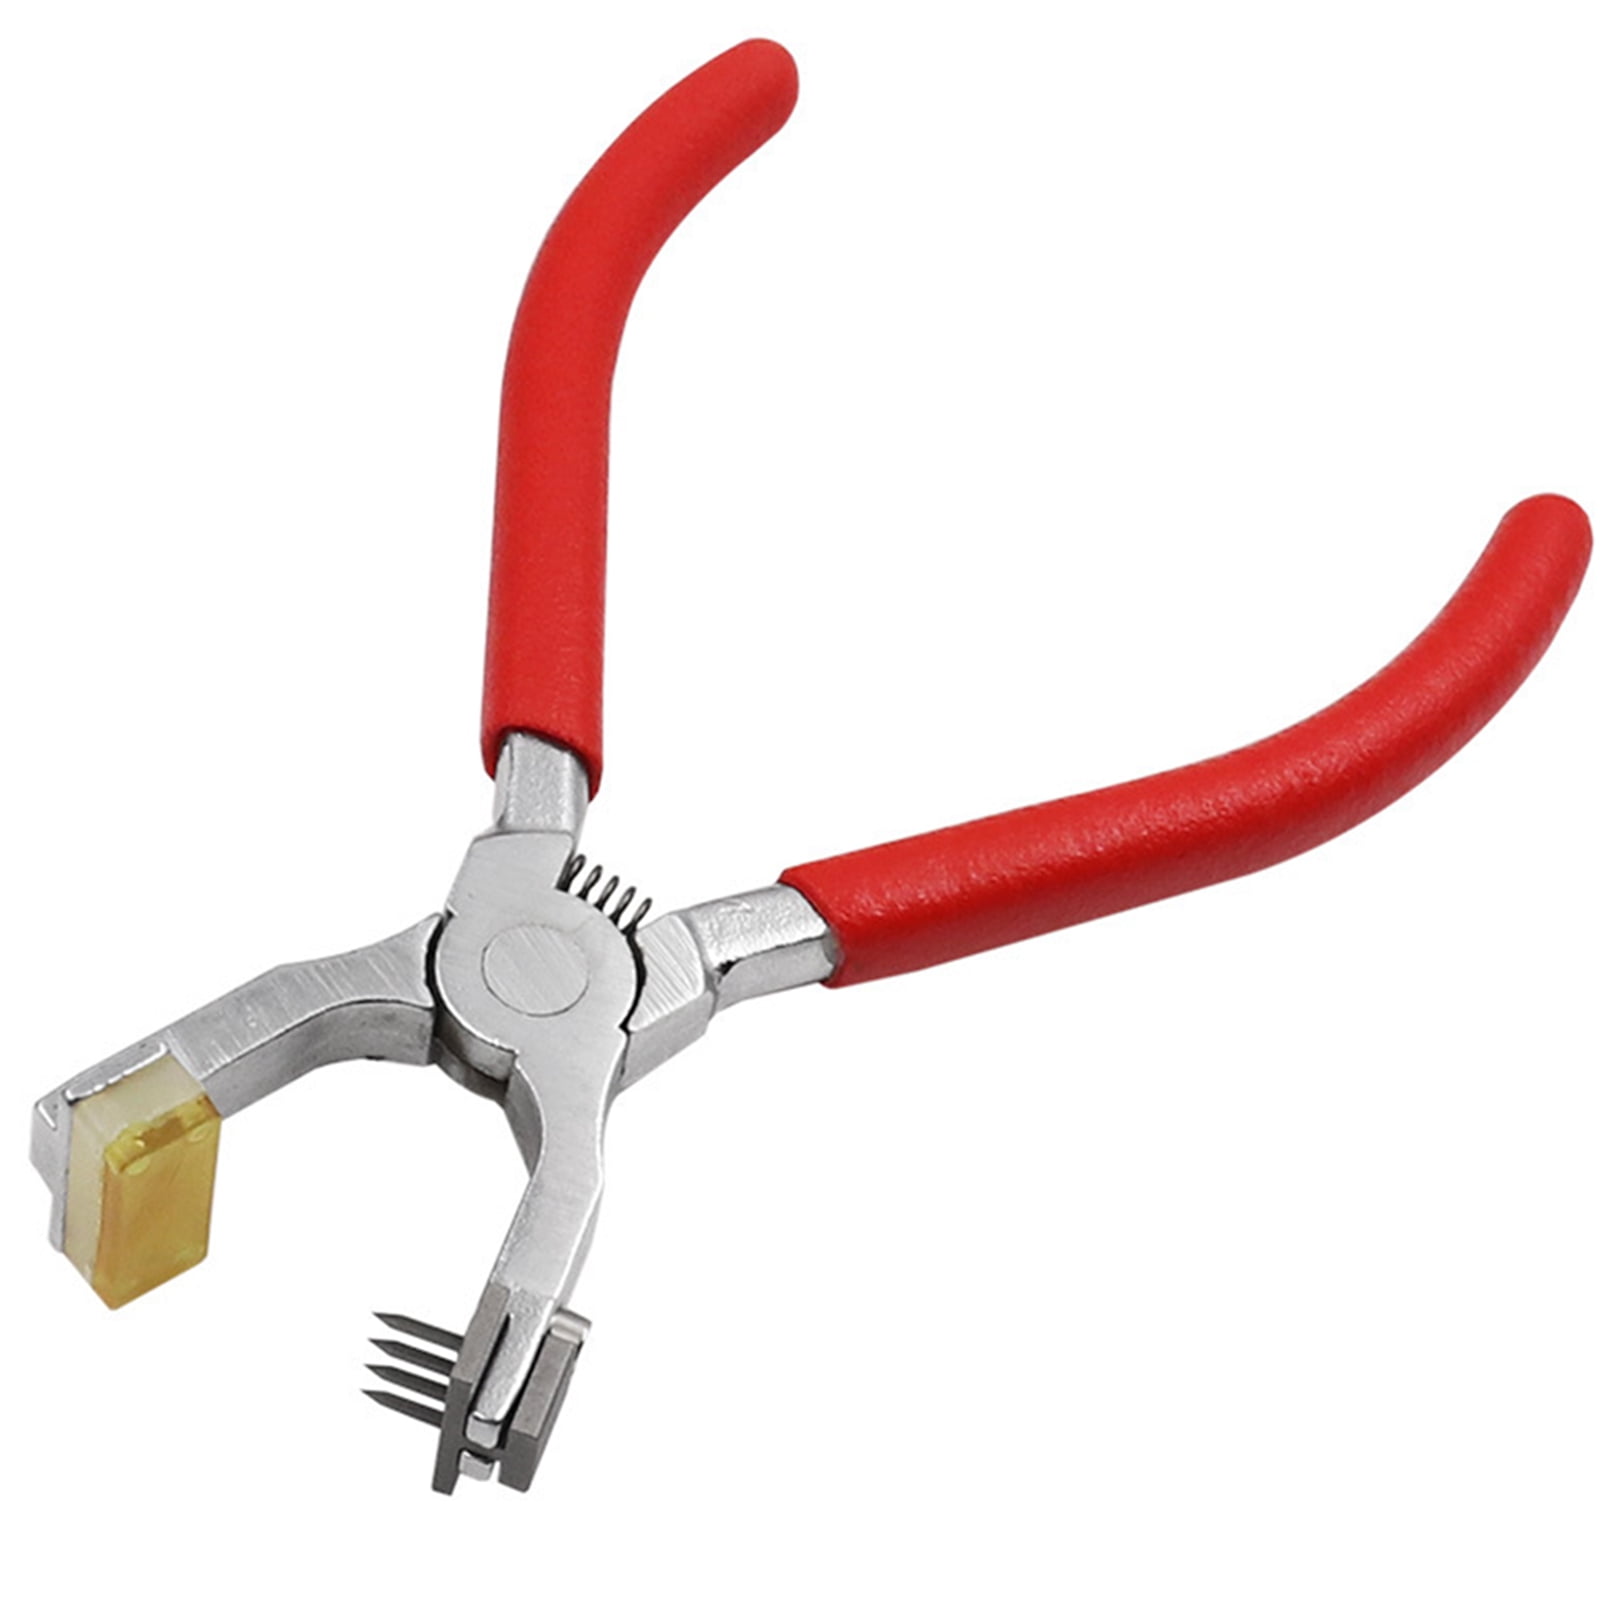 WUTA Leather Hand Held Silent Pliers Hole Punch Tools – WUTA LEATHER